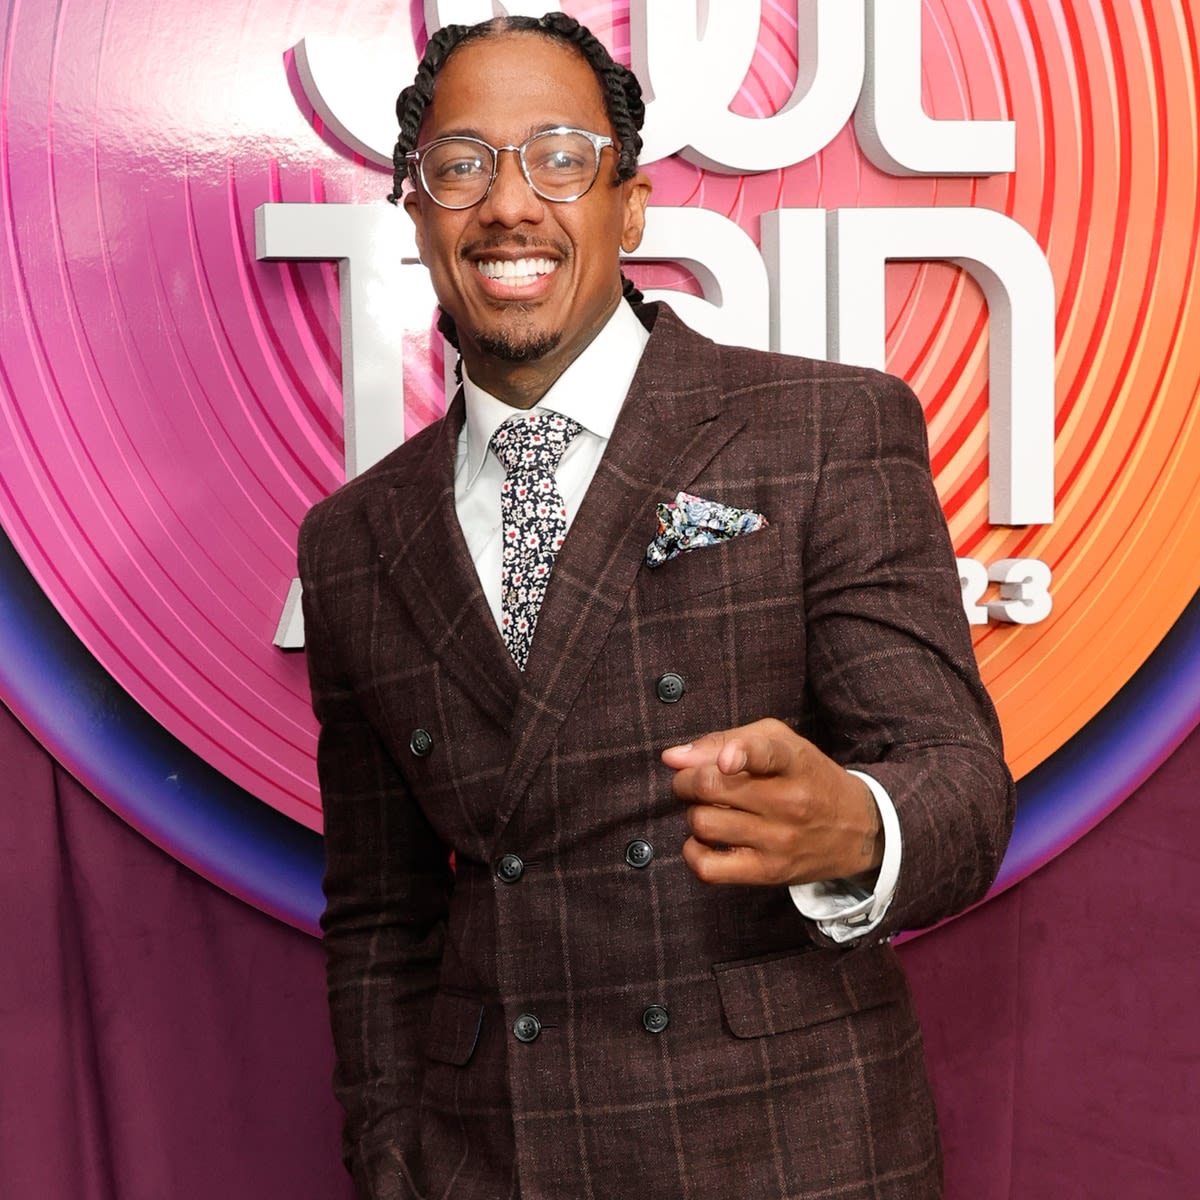 Nick Cannon Has His Balls Insured for $10 Million After 12 Kids